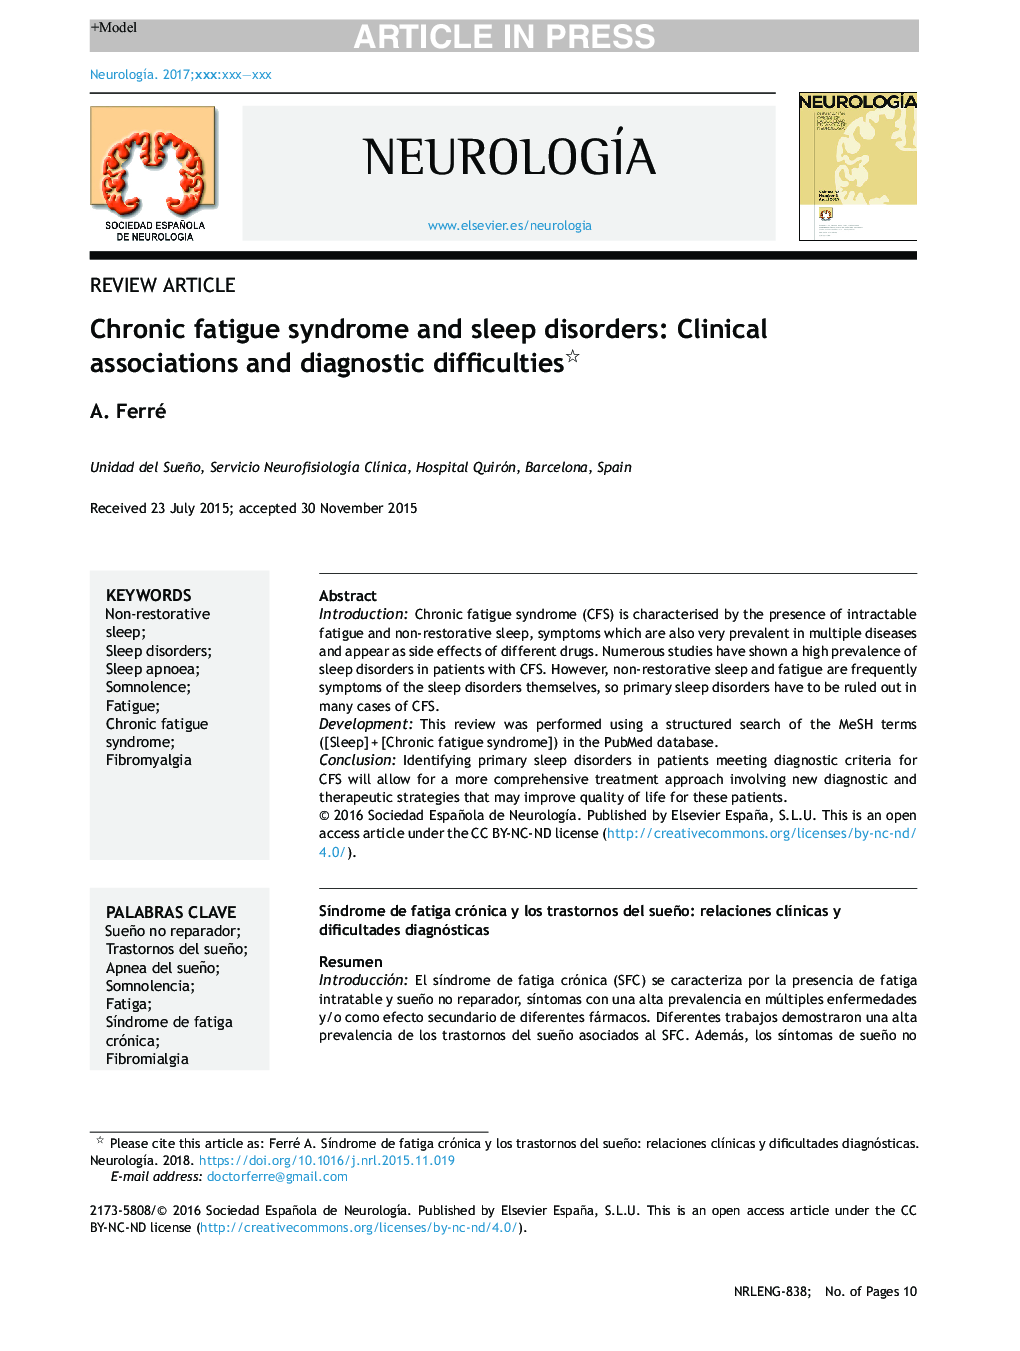 Chronic fatigue syndrome and sleep disorders: Clinical associations and diagnostic difficulties